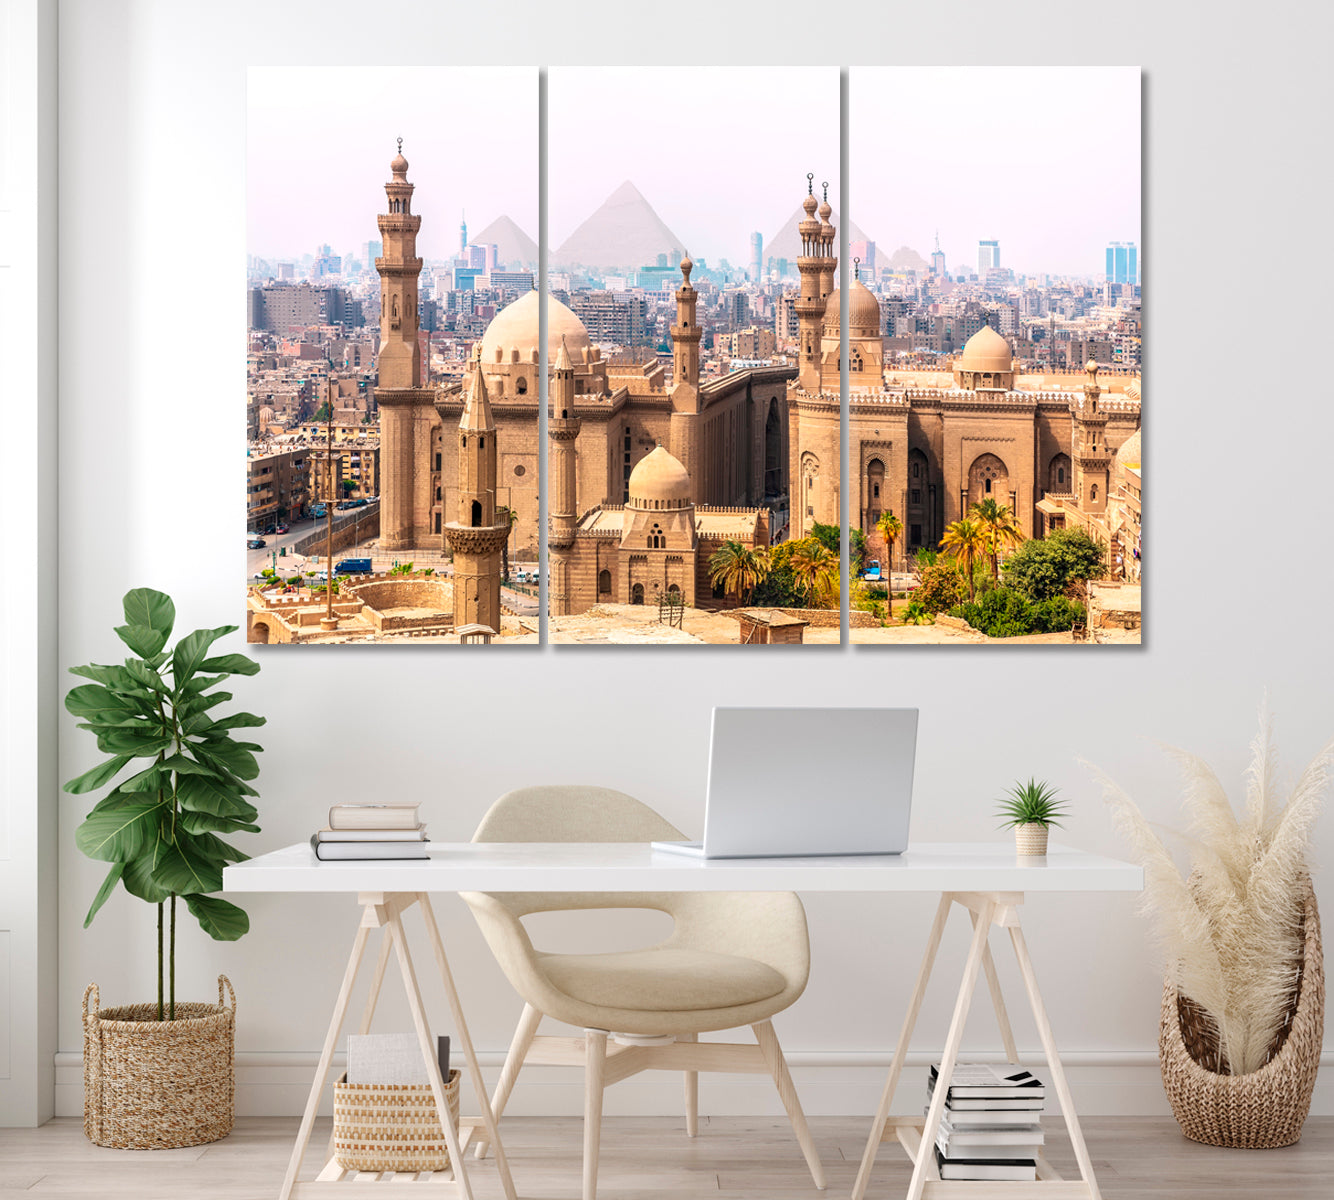 Mosque-Madrassa of Sultan Hassan Egypt Canvas Print ArtLexy 3 Panels 36"x24" inches 